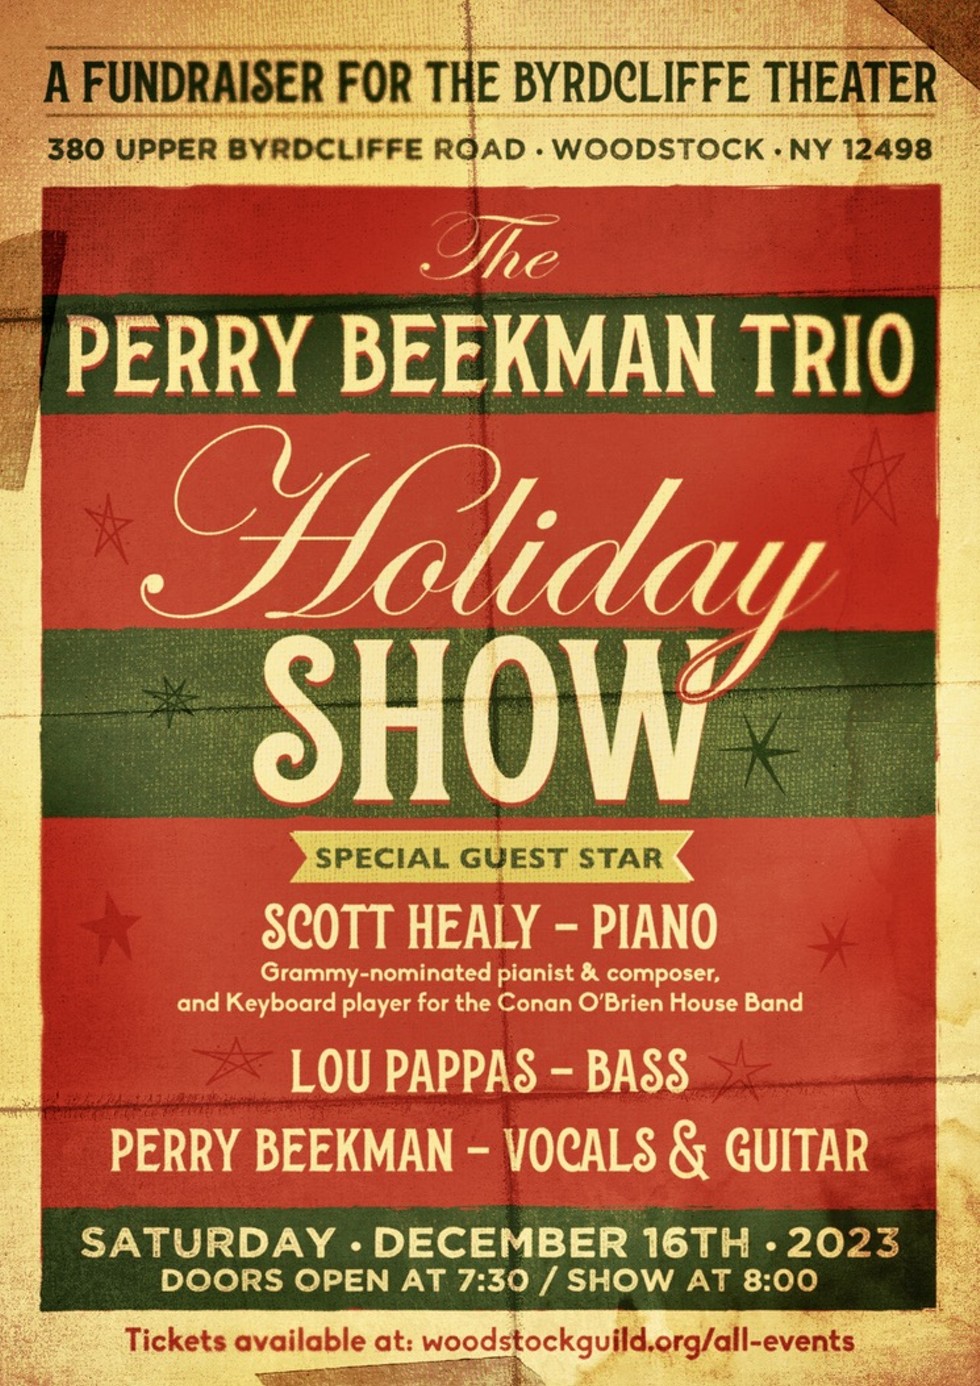 The Perry Beekman Holiday Show aththe Byrdcliffe Theater